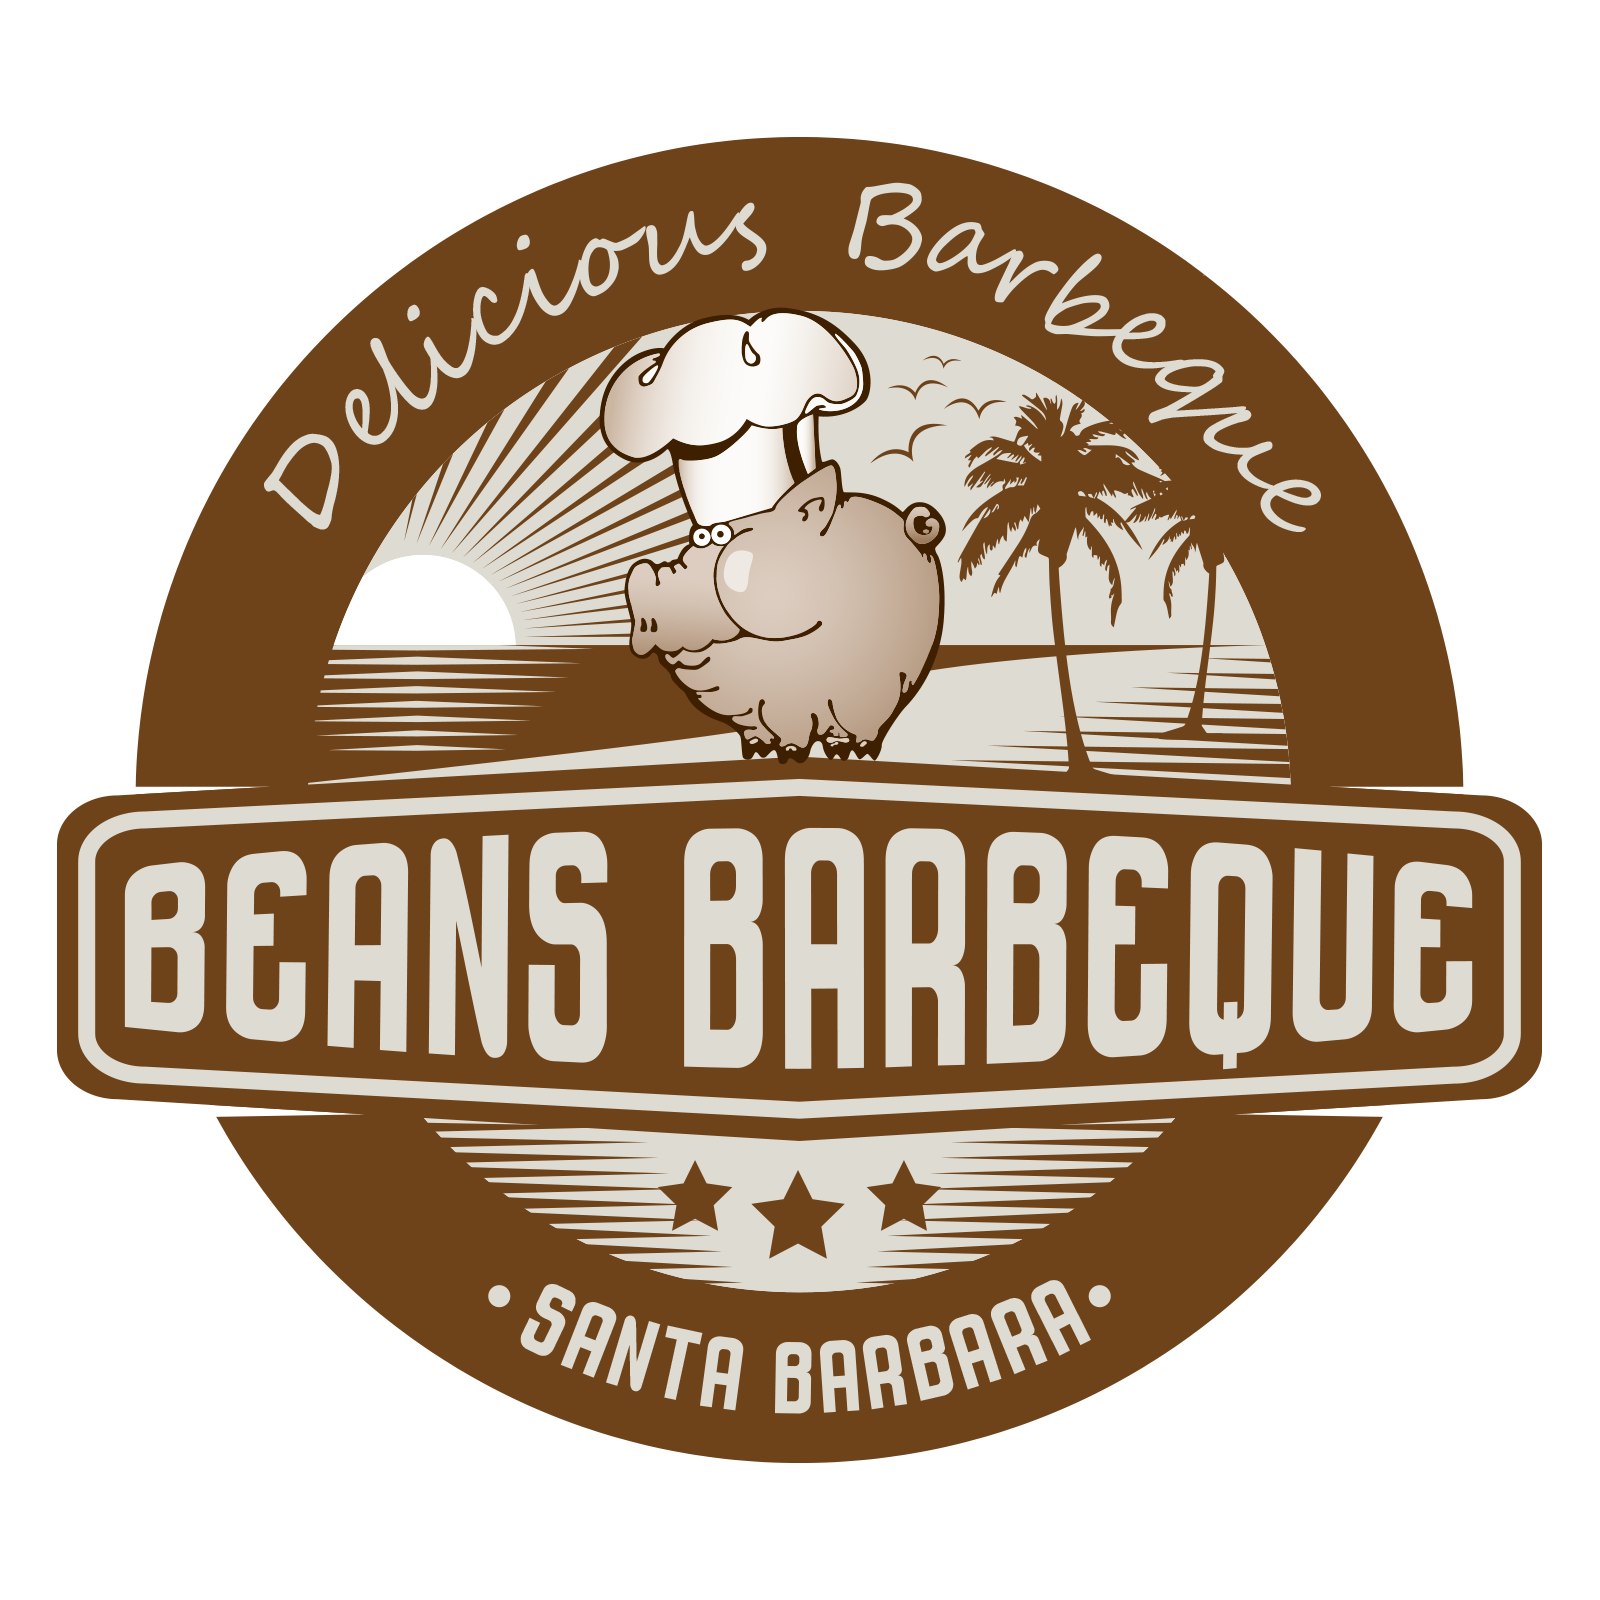 Beans BBQ and Catering